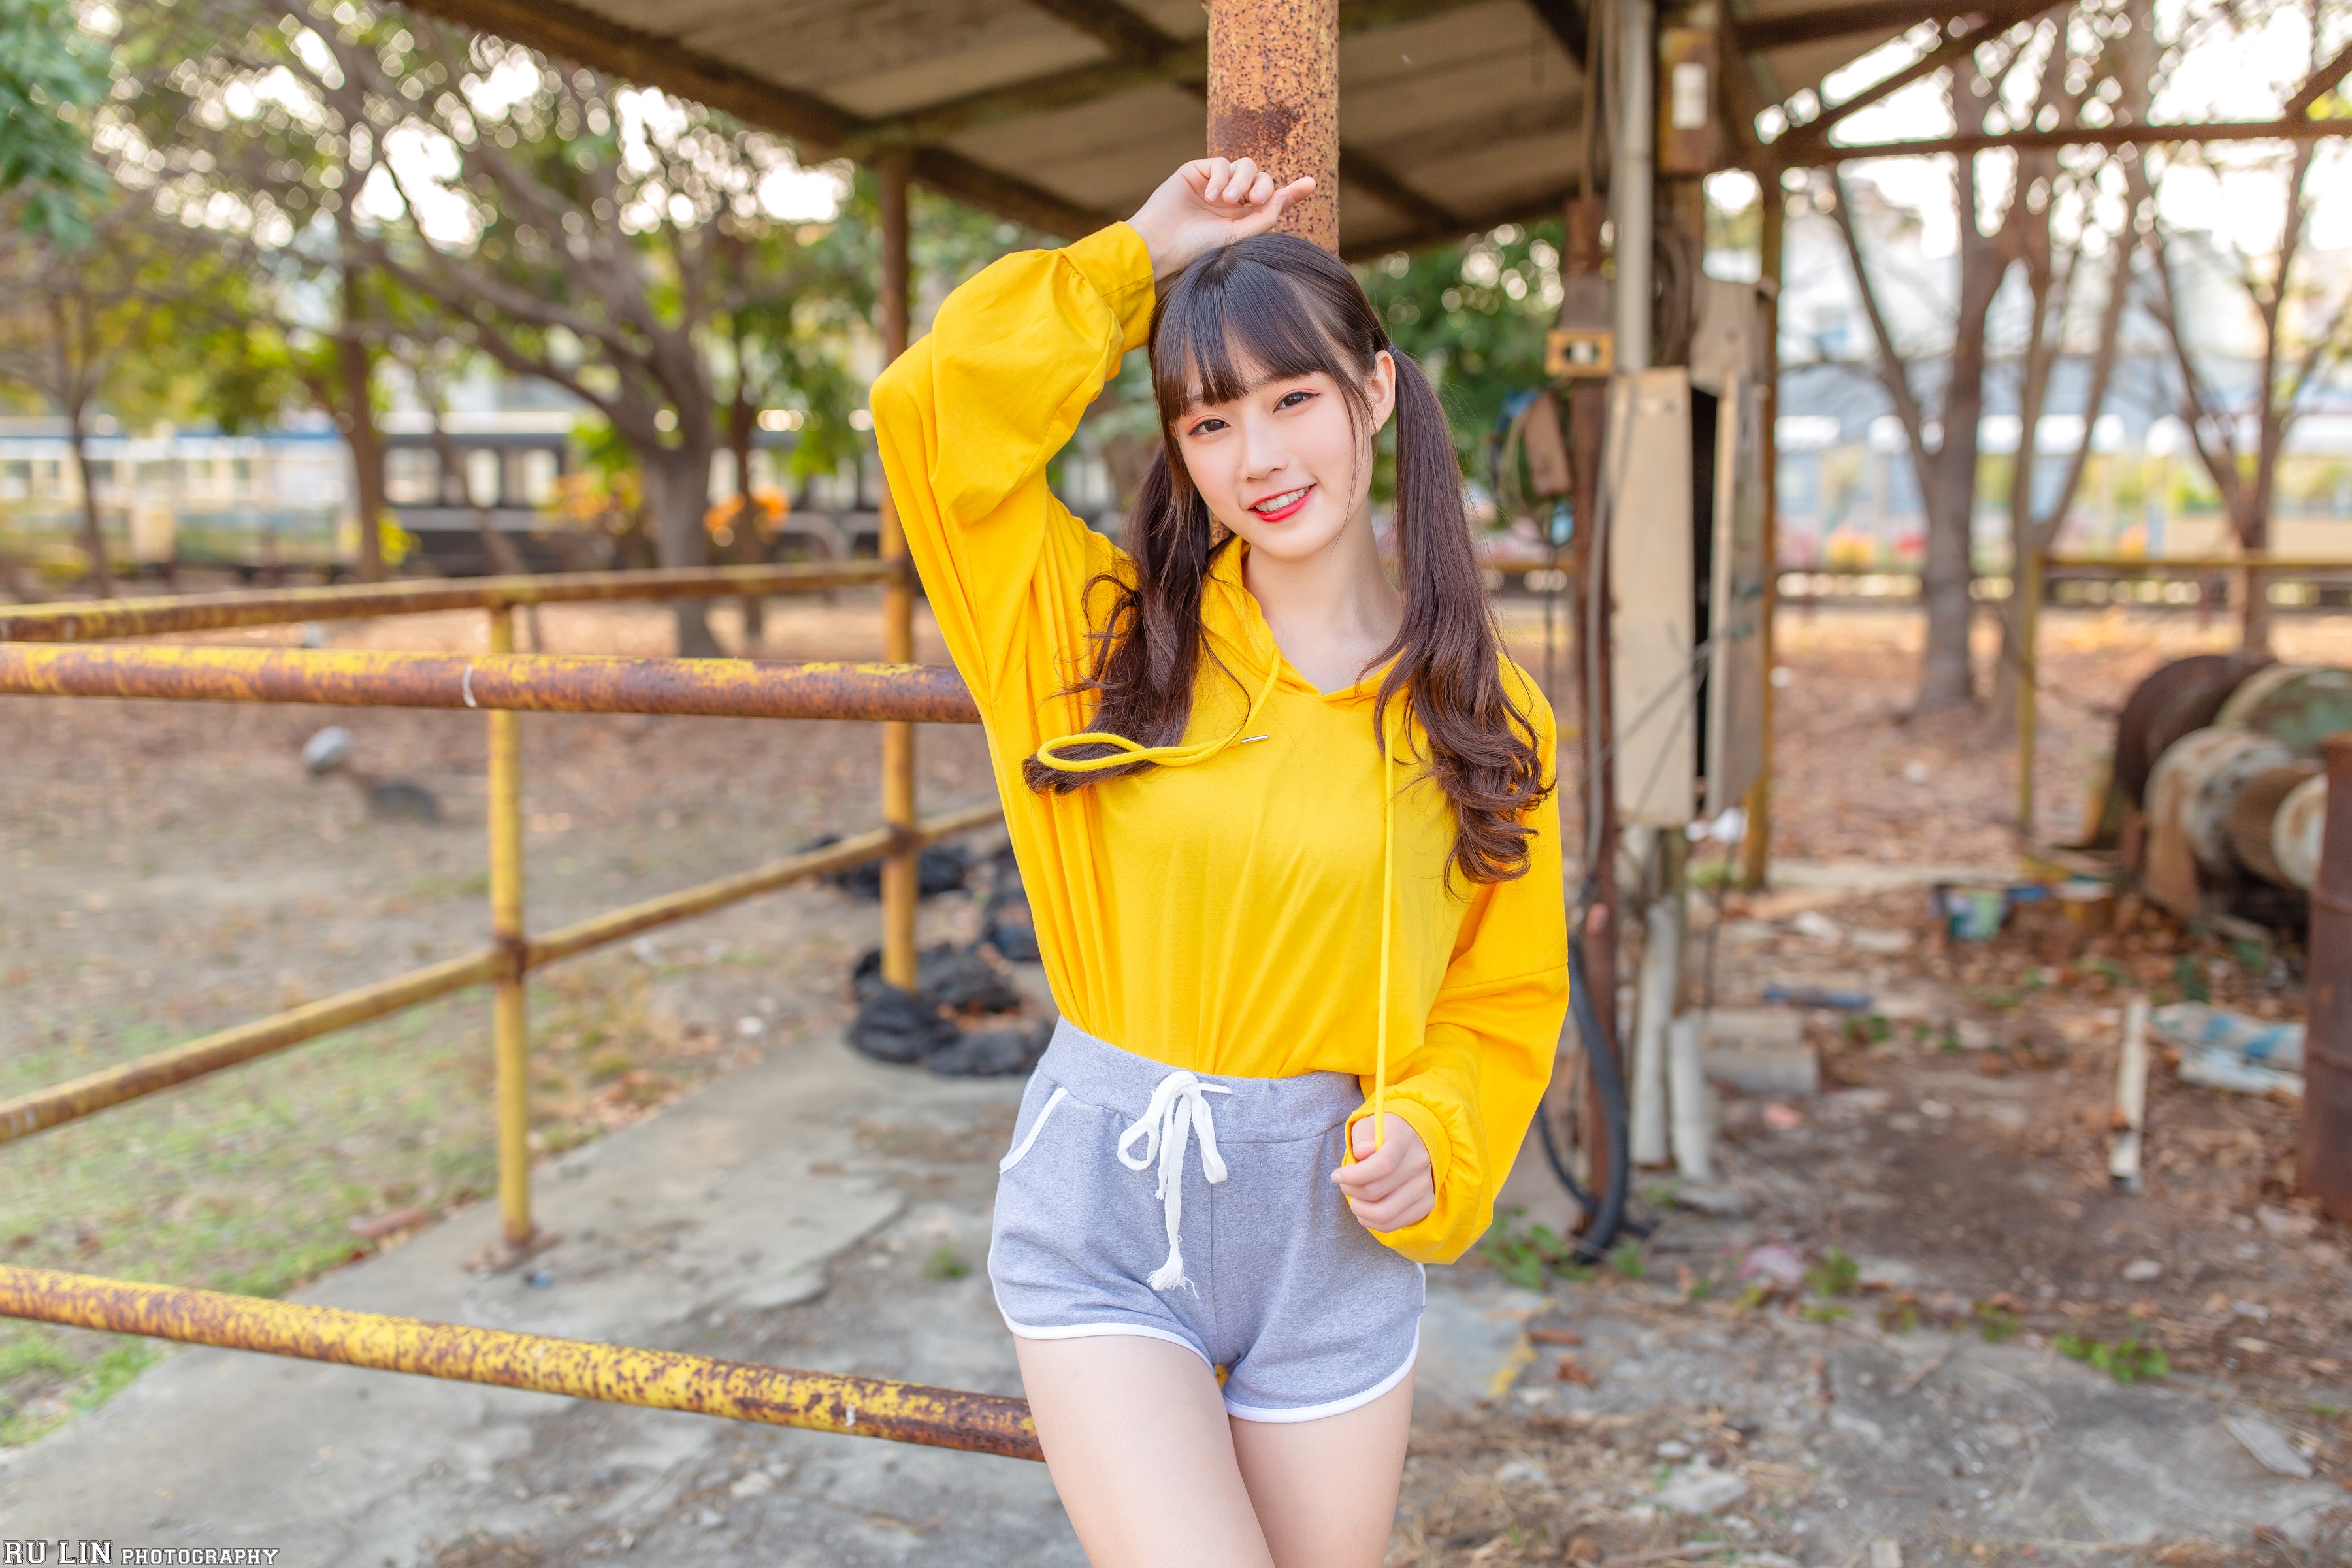 People 3600x2400 women model brunette Asian looking at viewer hoods sweatshirts short shorts portrait red lipstick smiling frontal view depth of field outdoors women outdoors twintails Angela Wei Ting